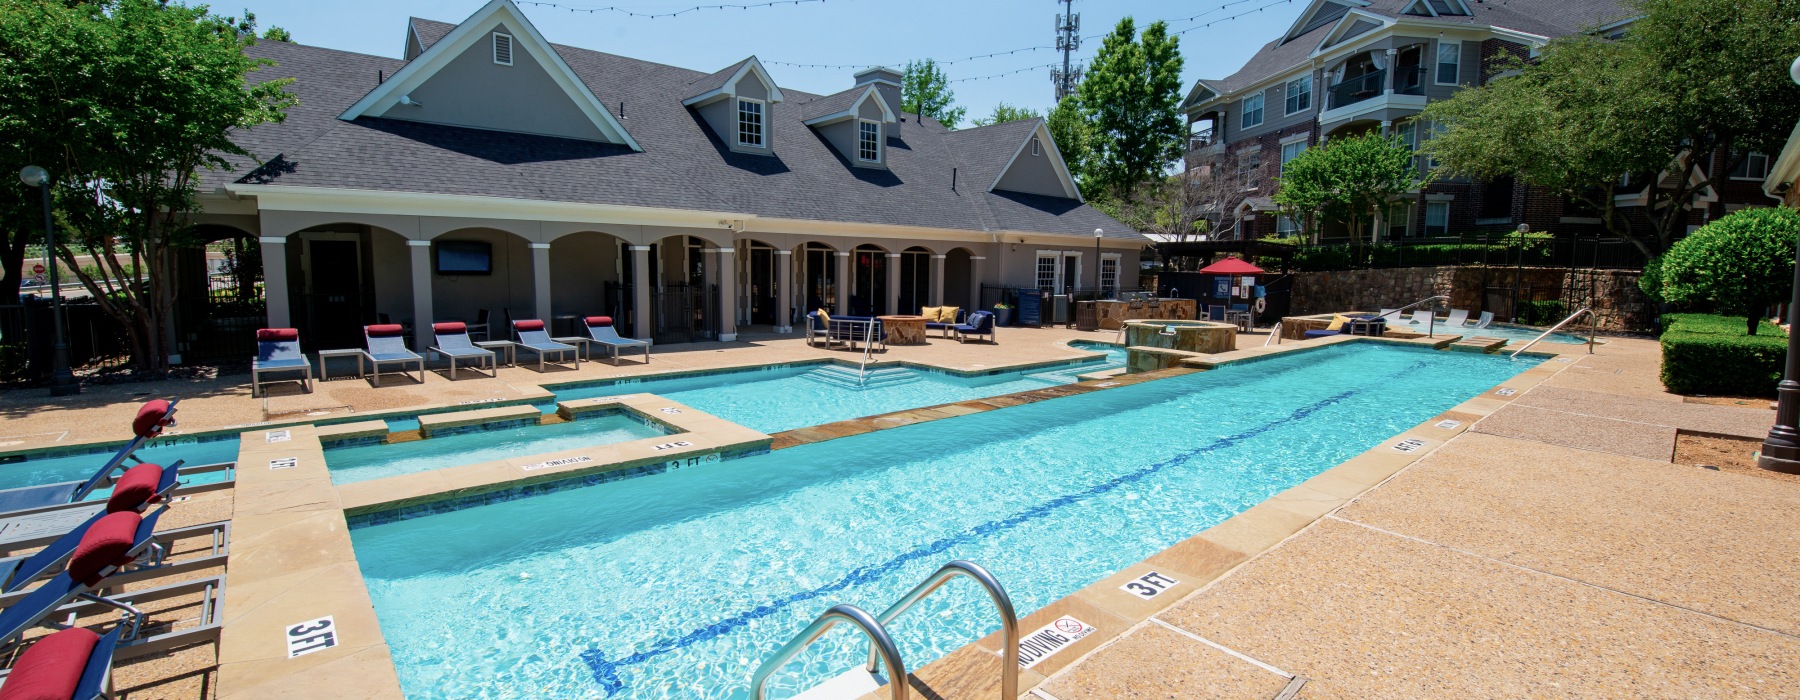 Pool area at our apartments in Grapevine, TX, featuring a hot tub and a shade structure with chairs.